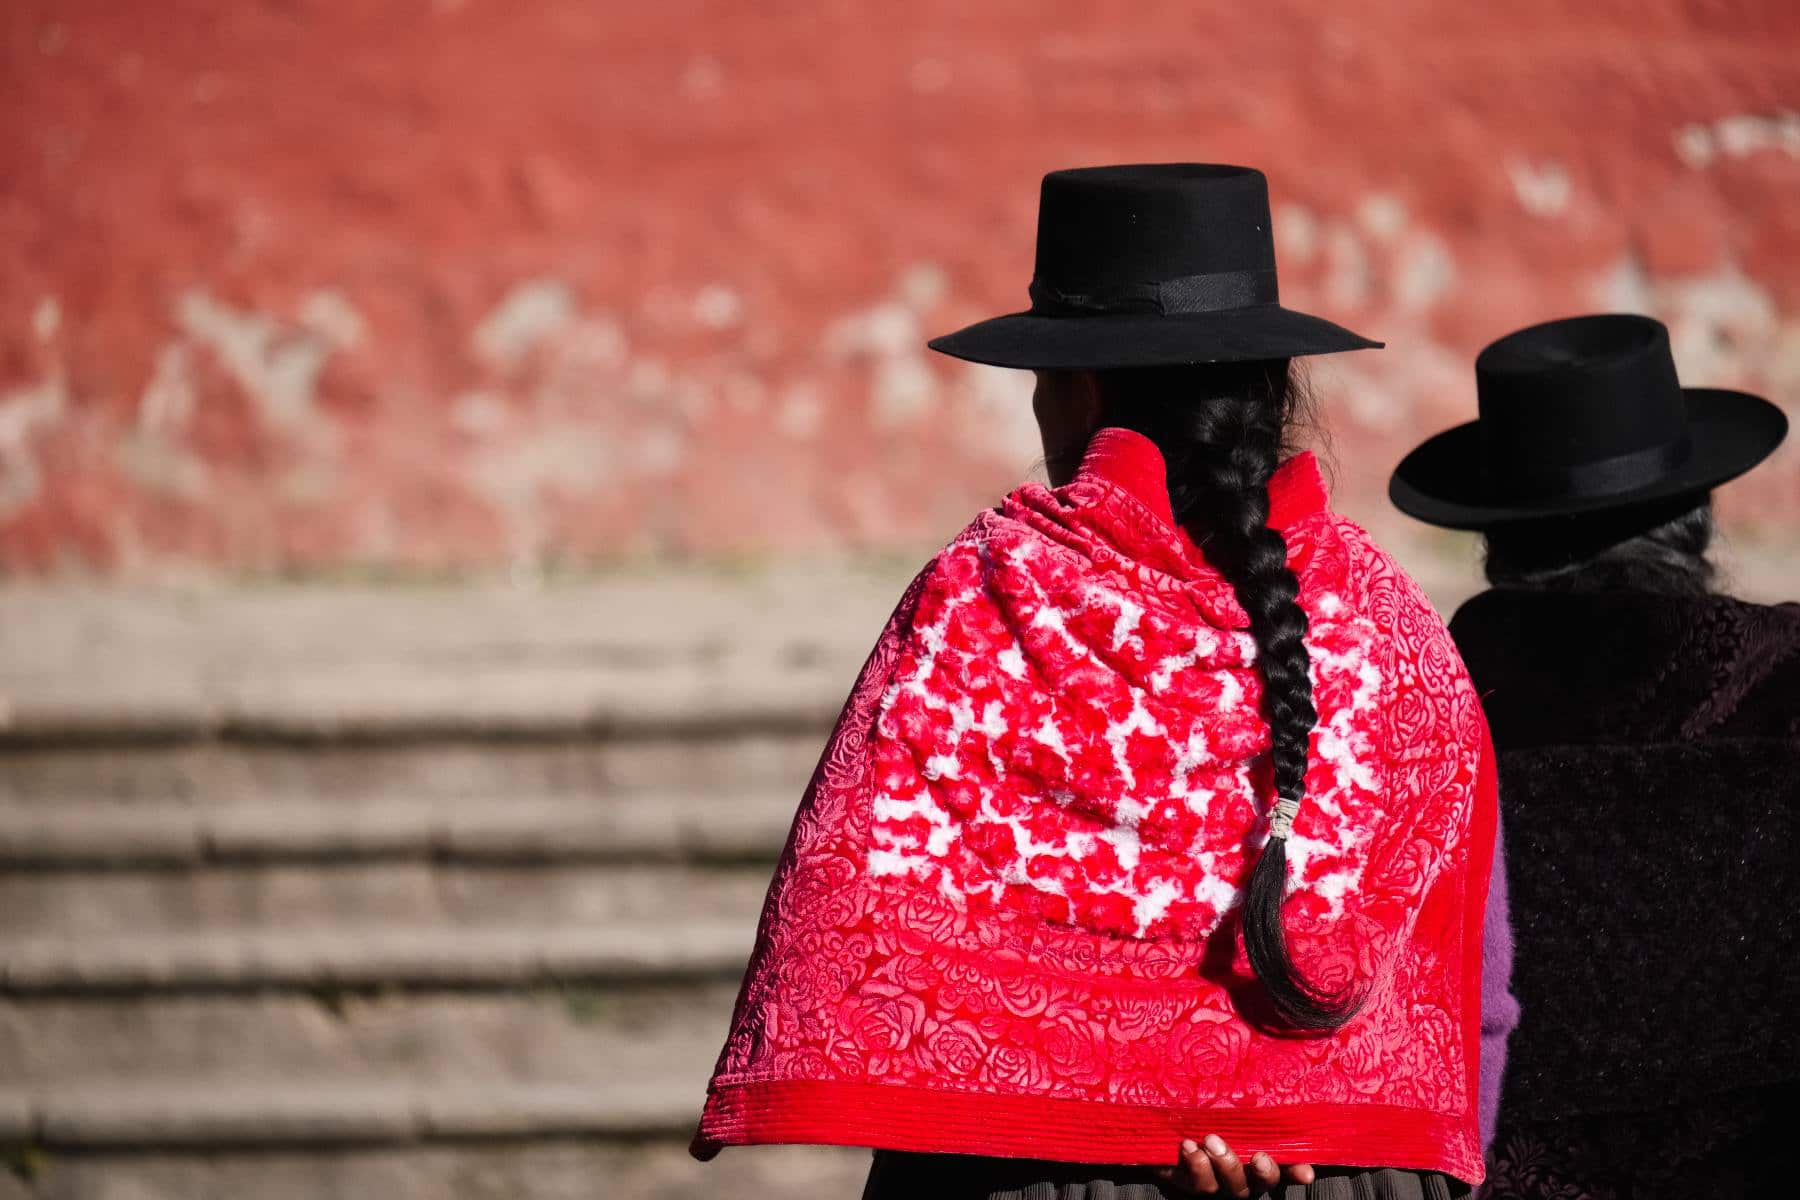 Huancavelica street photography